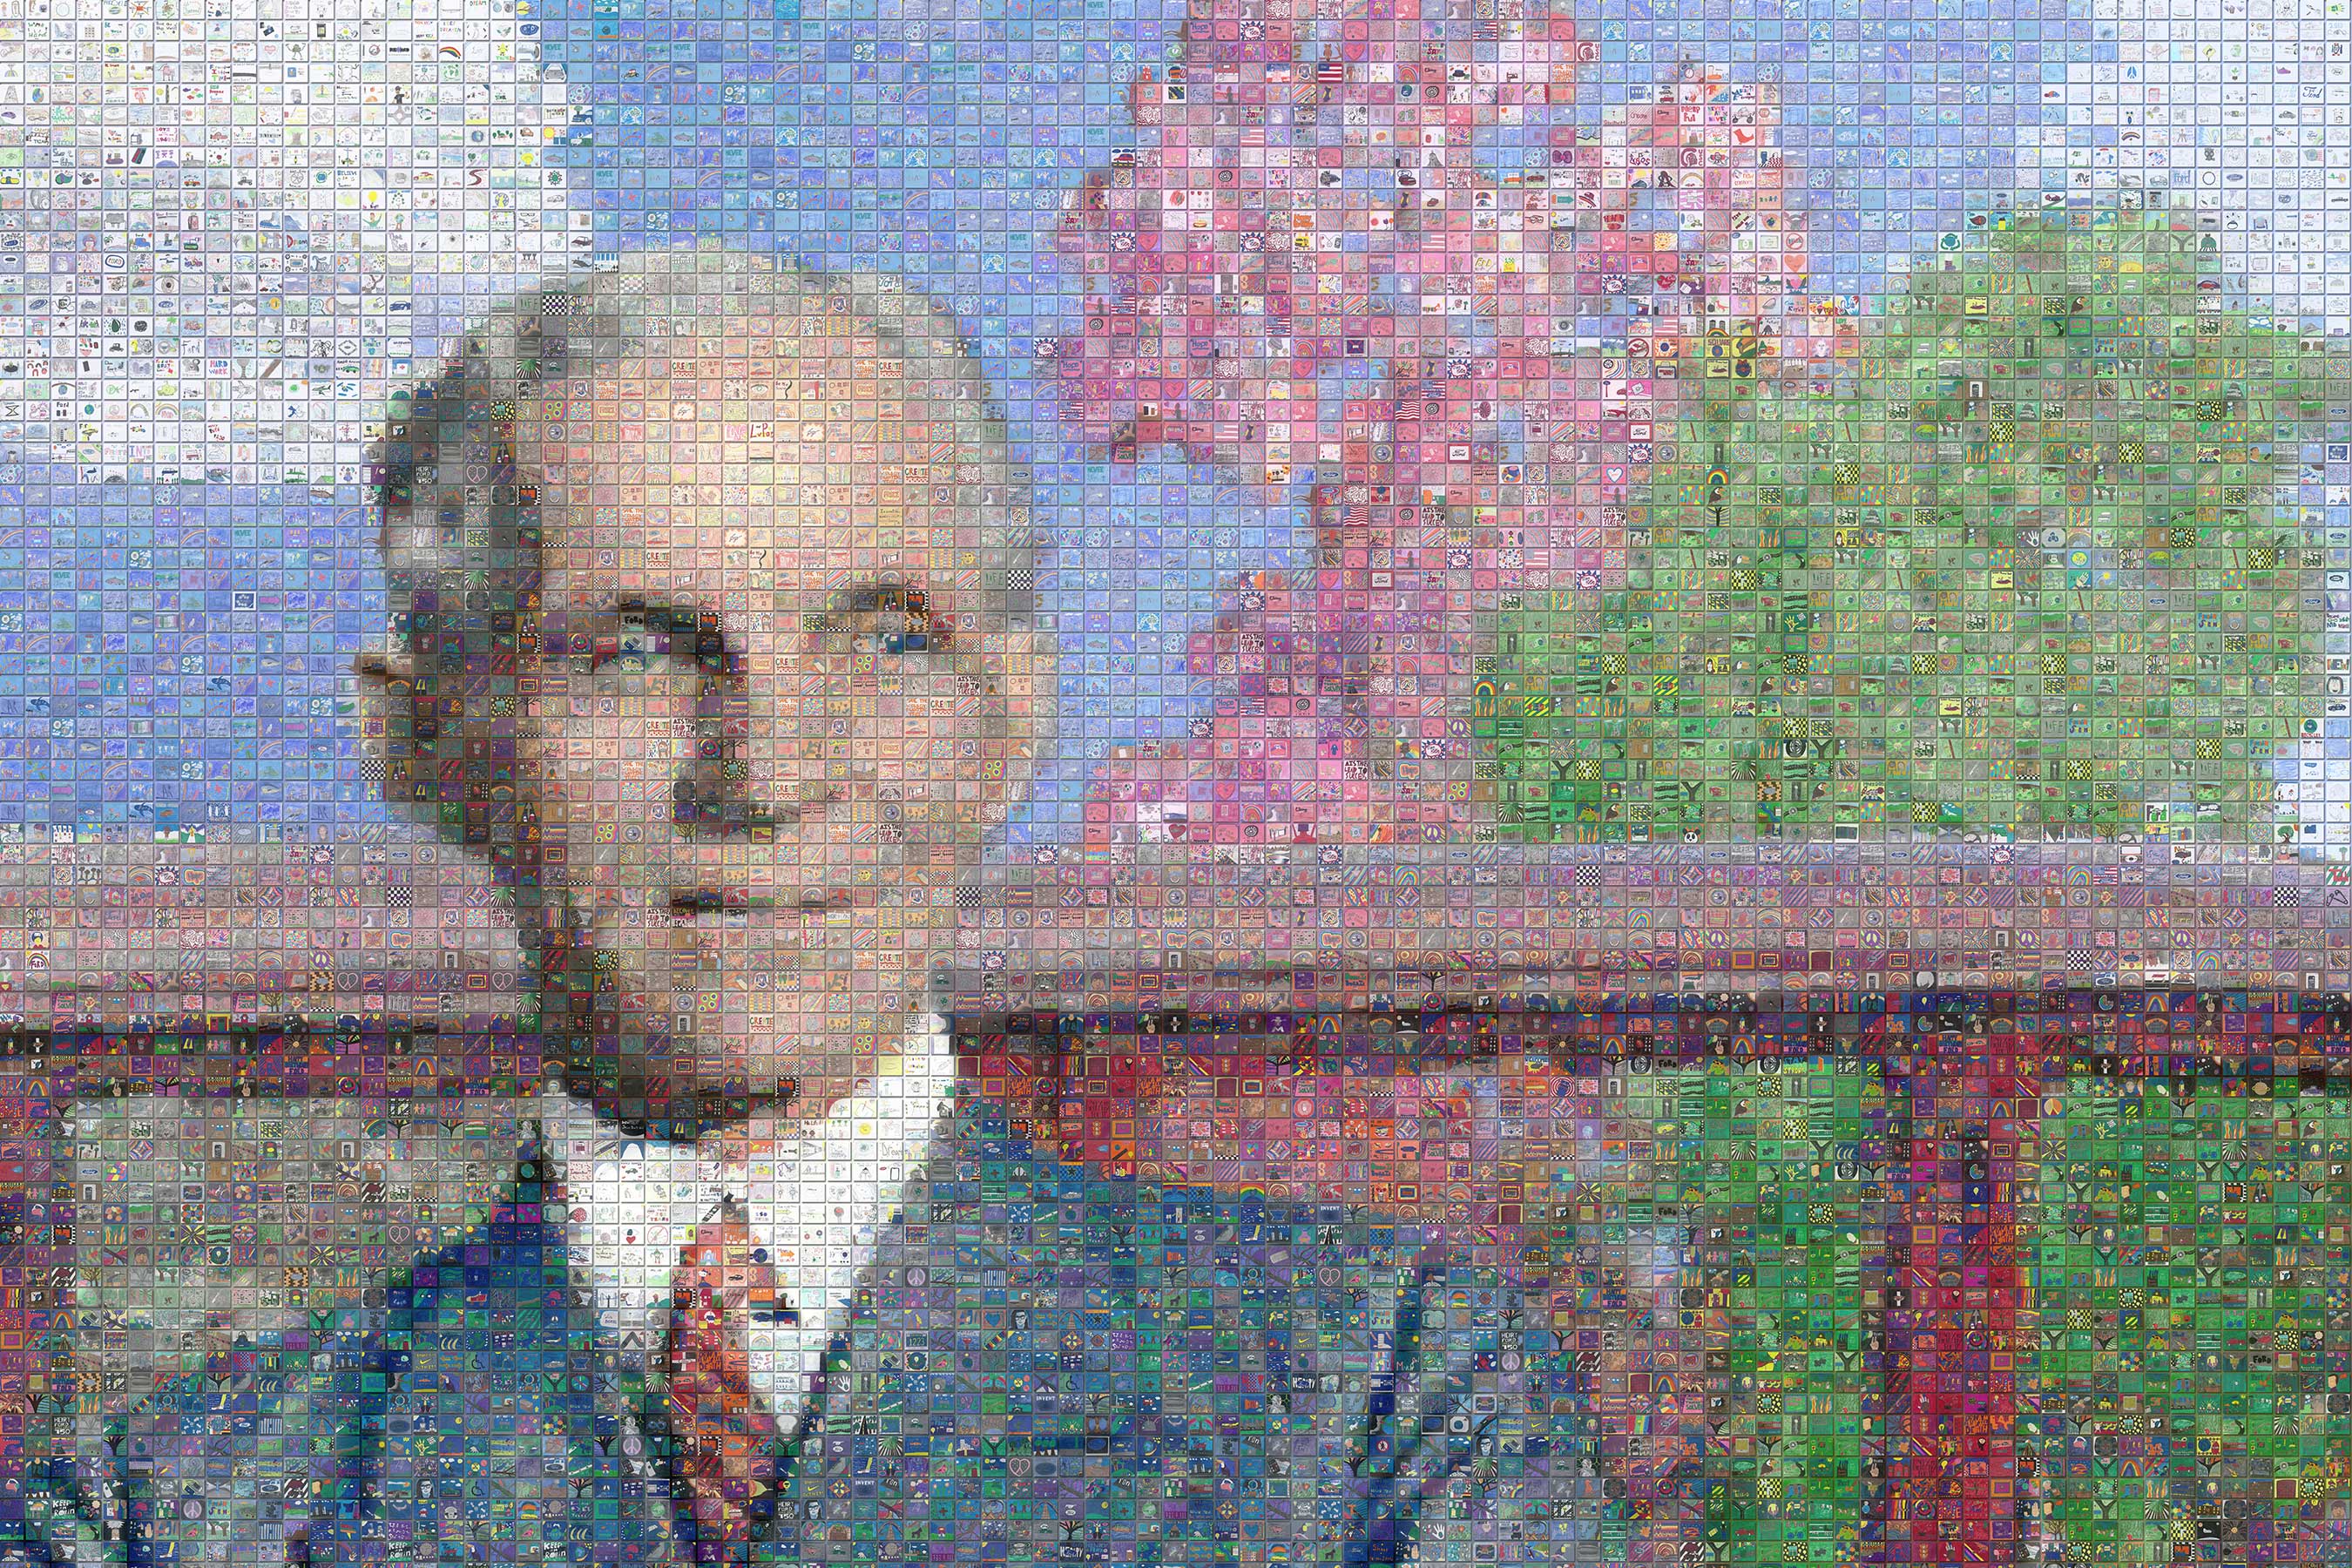 Henry Ford’s 150th:  “Innovation”